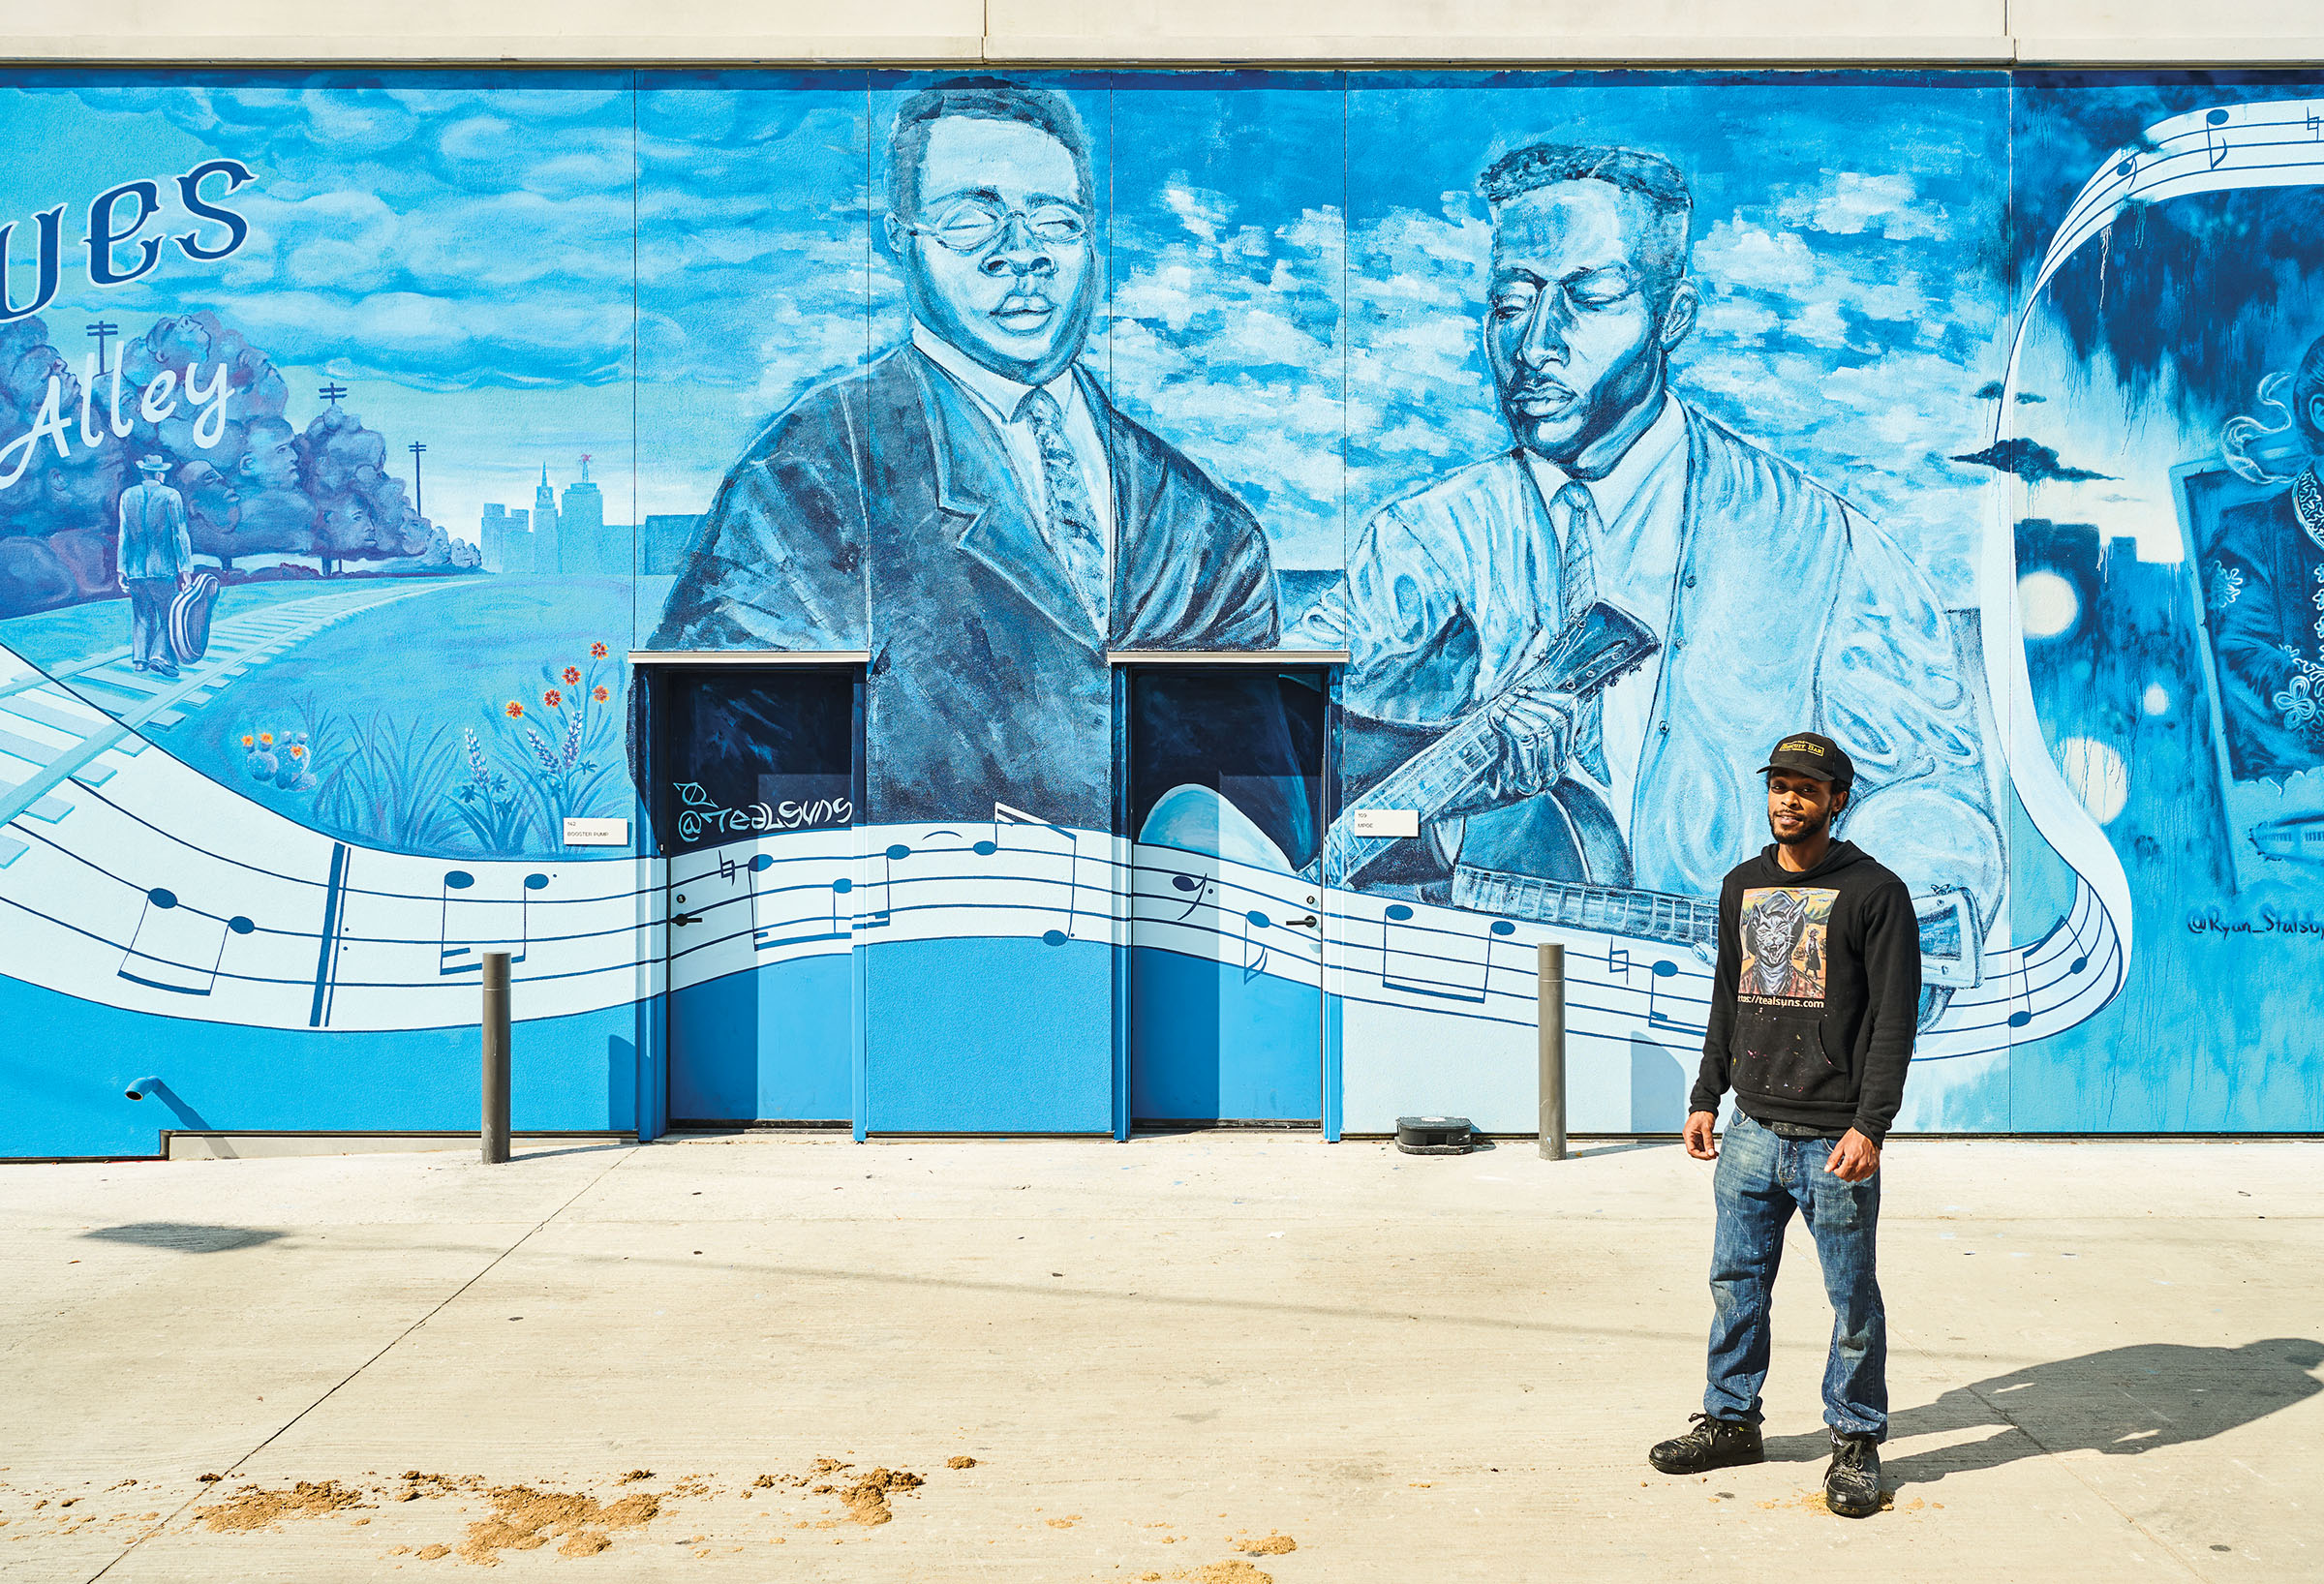 A man in a black sweatshirt and jeans stands in front of a blue-toned mural with two men and musical notes